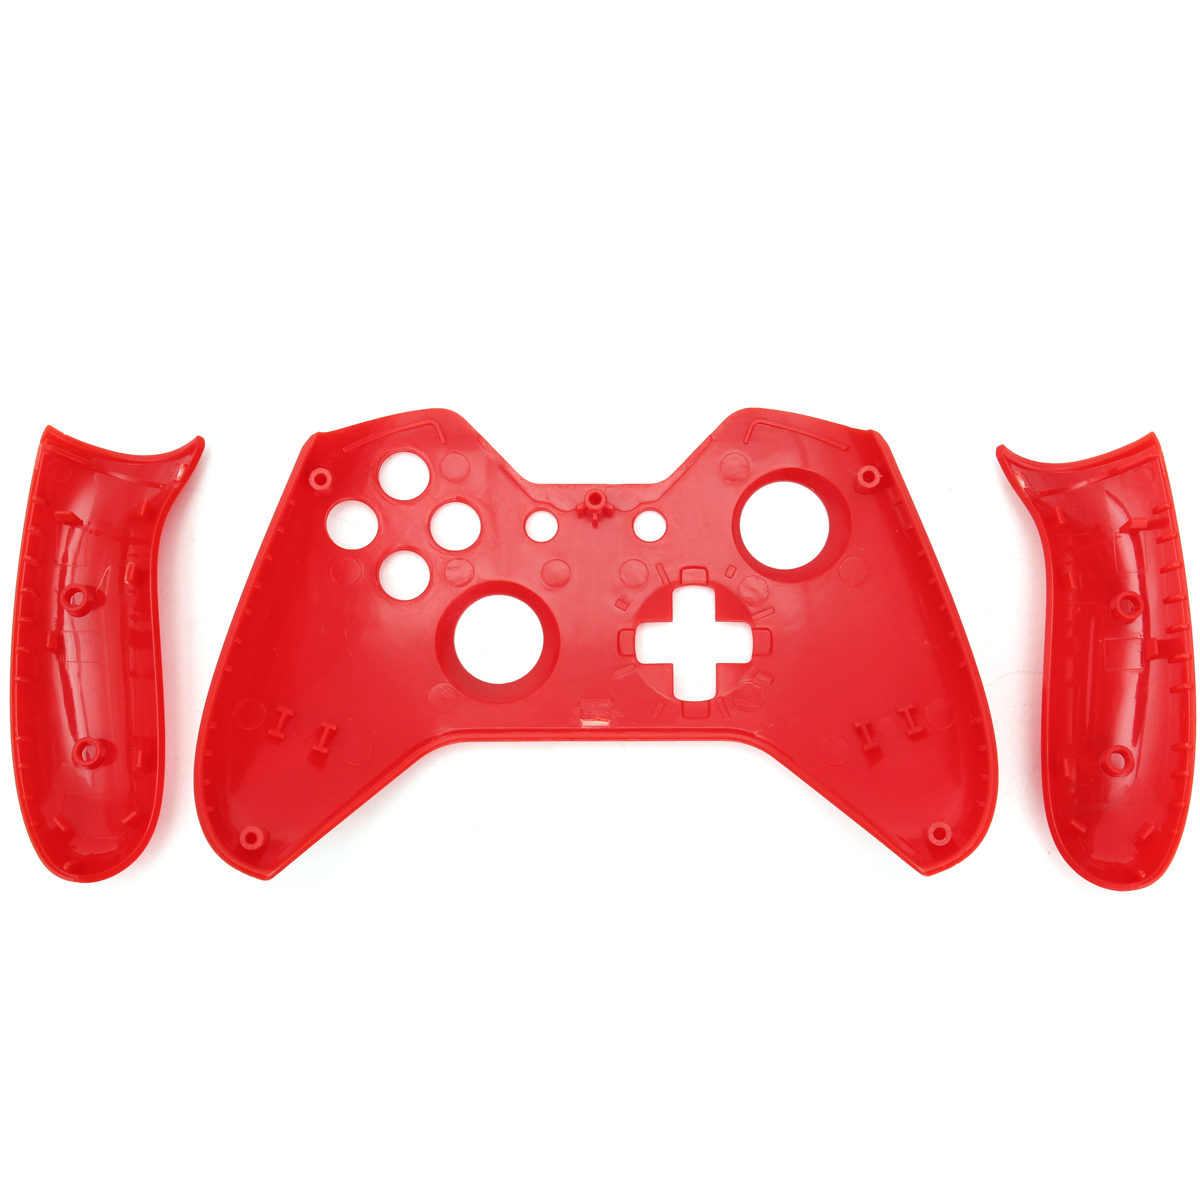 Soft Touch Front Housing Shell Faceplate Replacement for Xbox One Controller 8